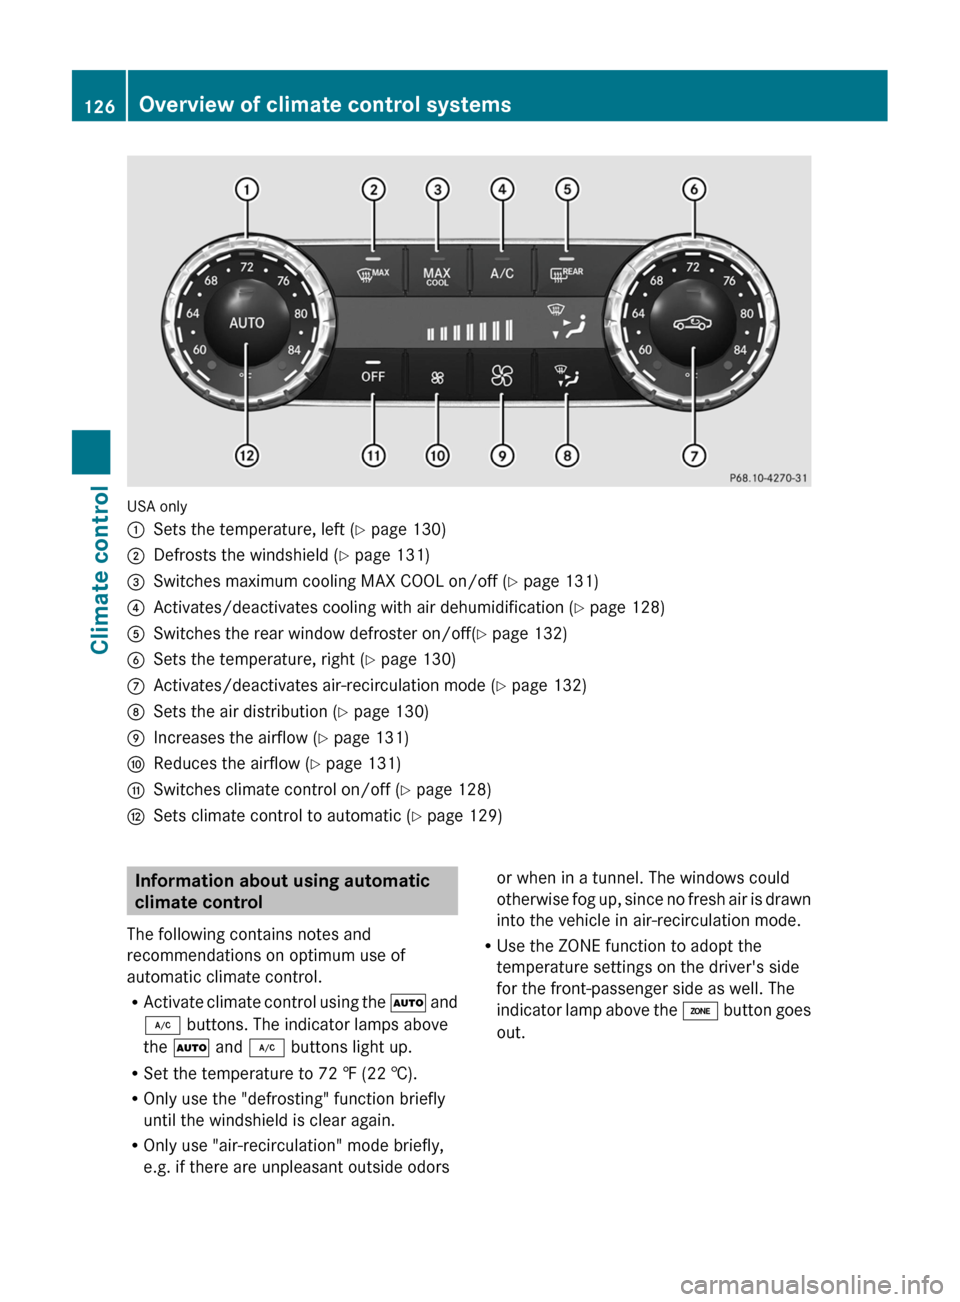 MERCEDES-BENZ CLS-Class 2013 W218 Repair Manual USA only
:
Sets the temperature, left ( Y page 130)
; Defrosts the windshield ( Y page 131)
= Switches maximum cooling MAX COOL on/off ( Y page 131)
? Activates/deactivates cooling with air dehumidifi